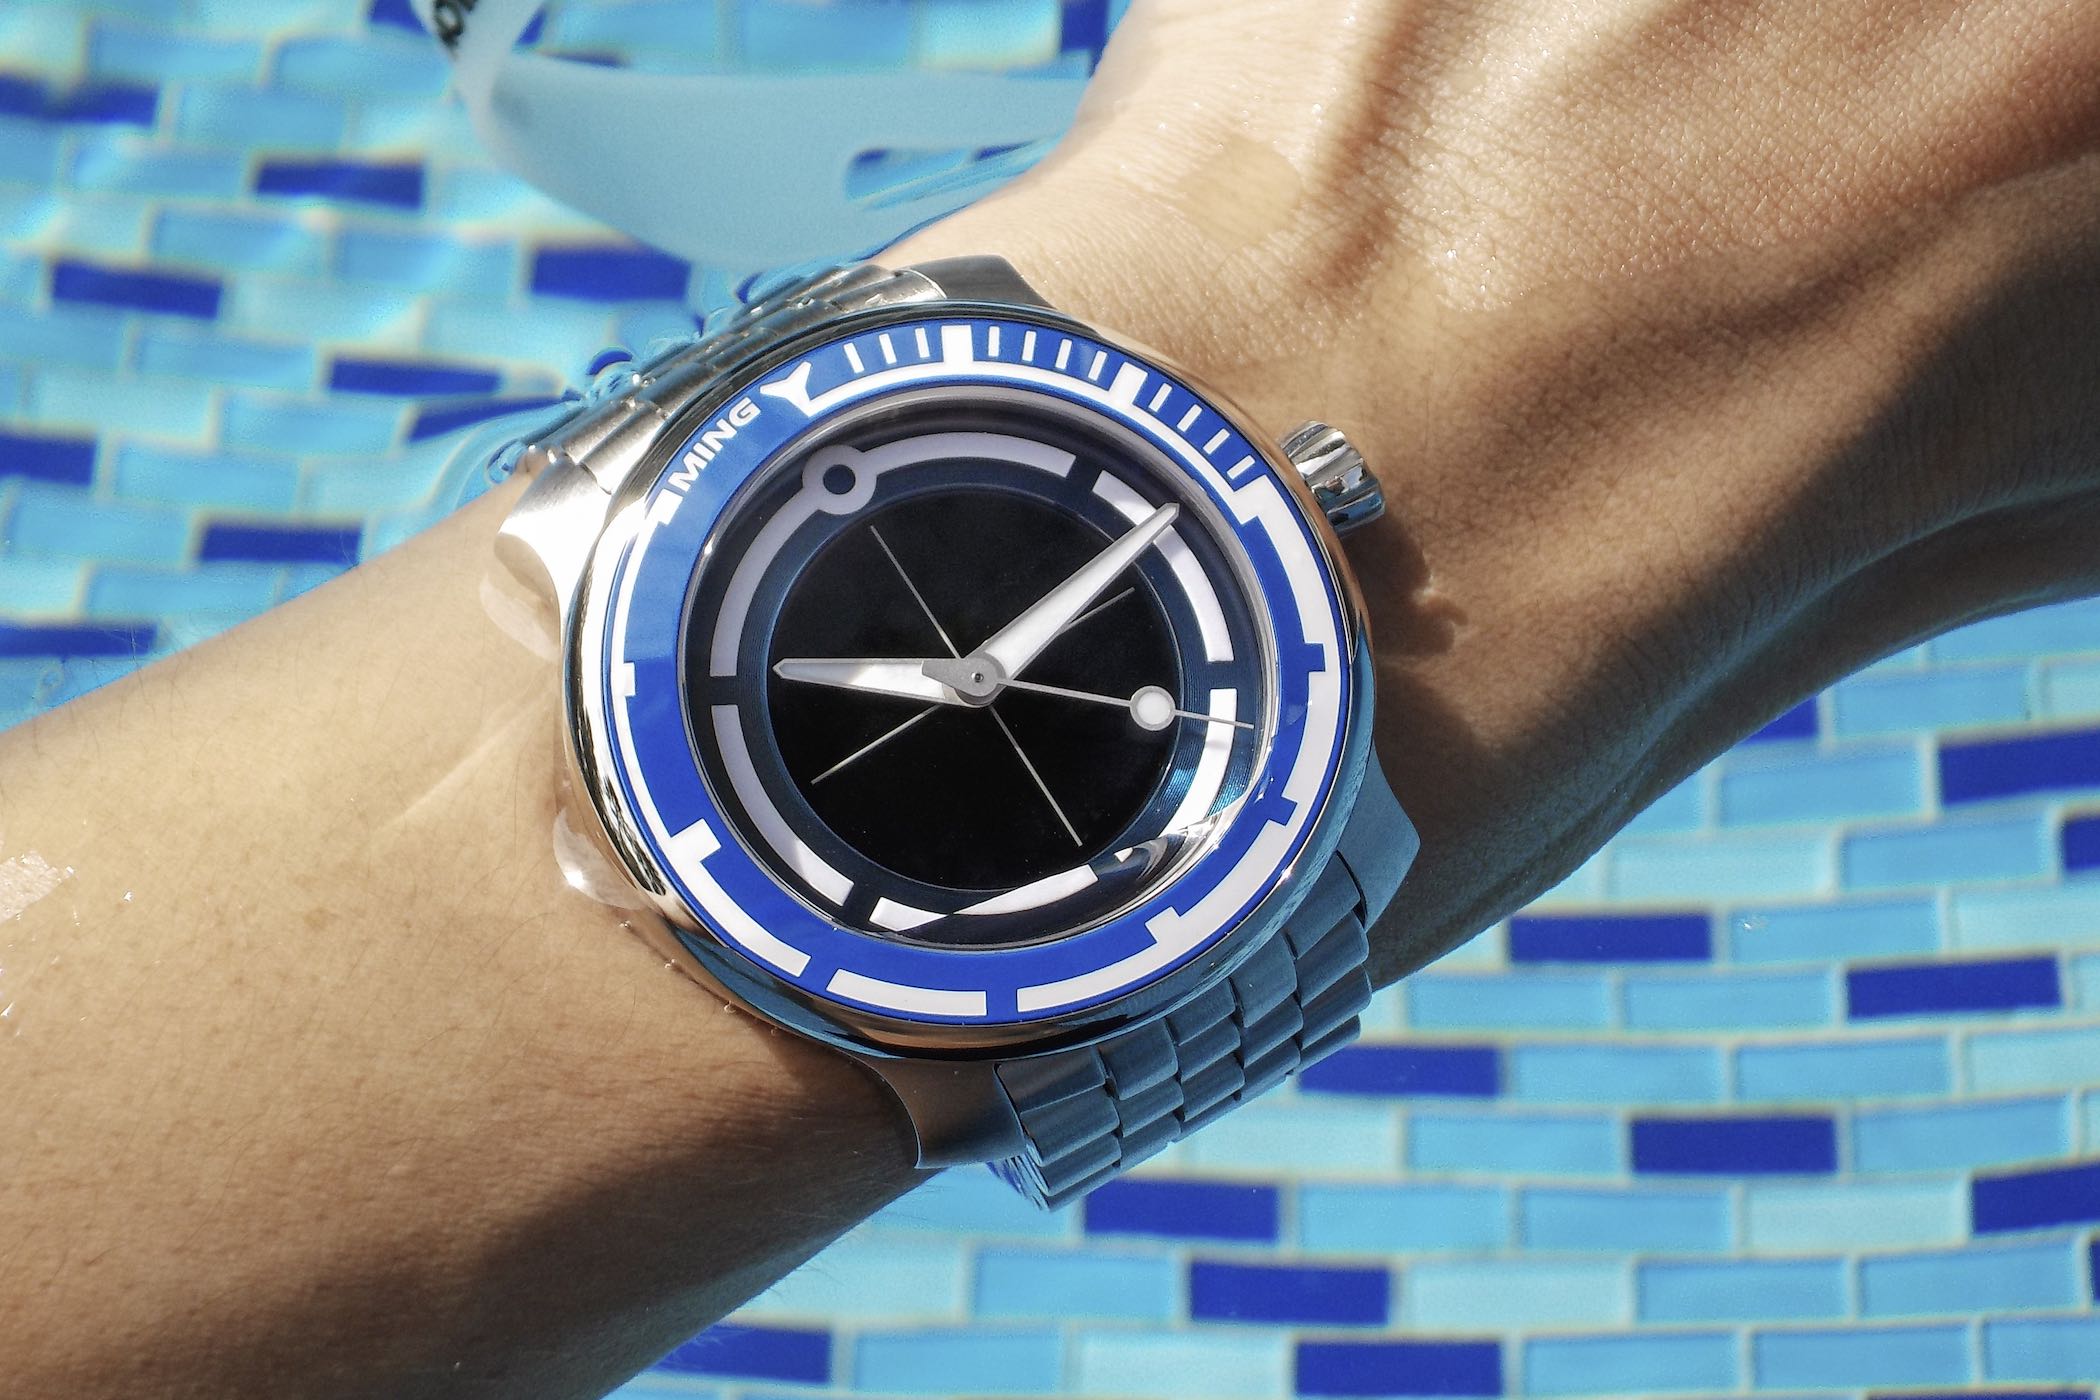 MING Watch 18.01 Abyss Concept Dive Watch